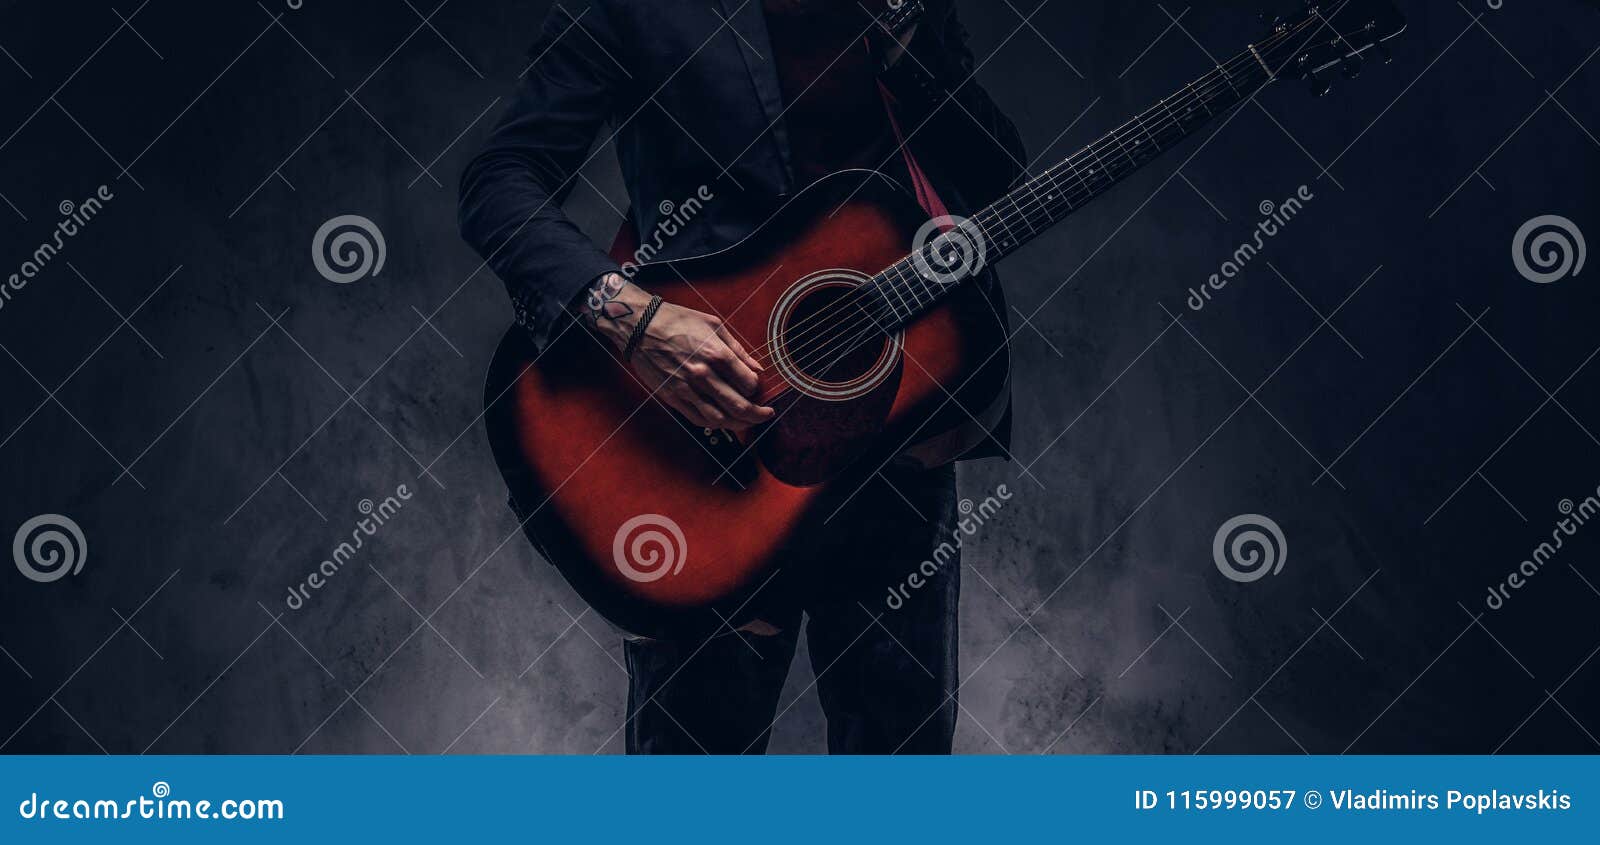 cropped image of a musician in elegant clothes with a guitar in his hands playing and posing.